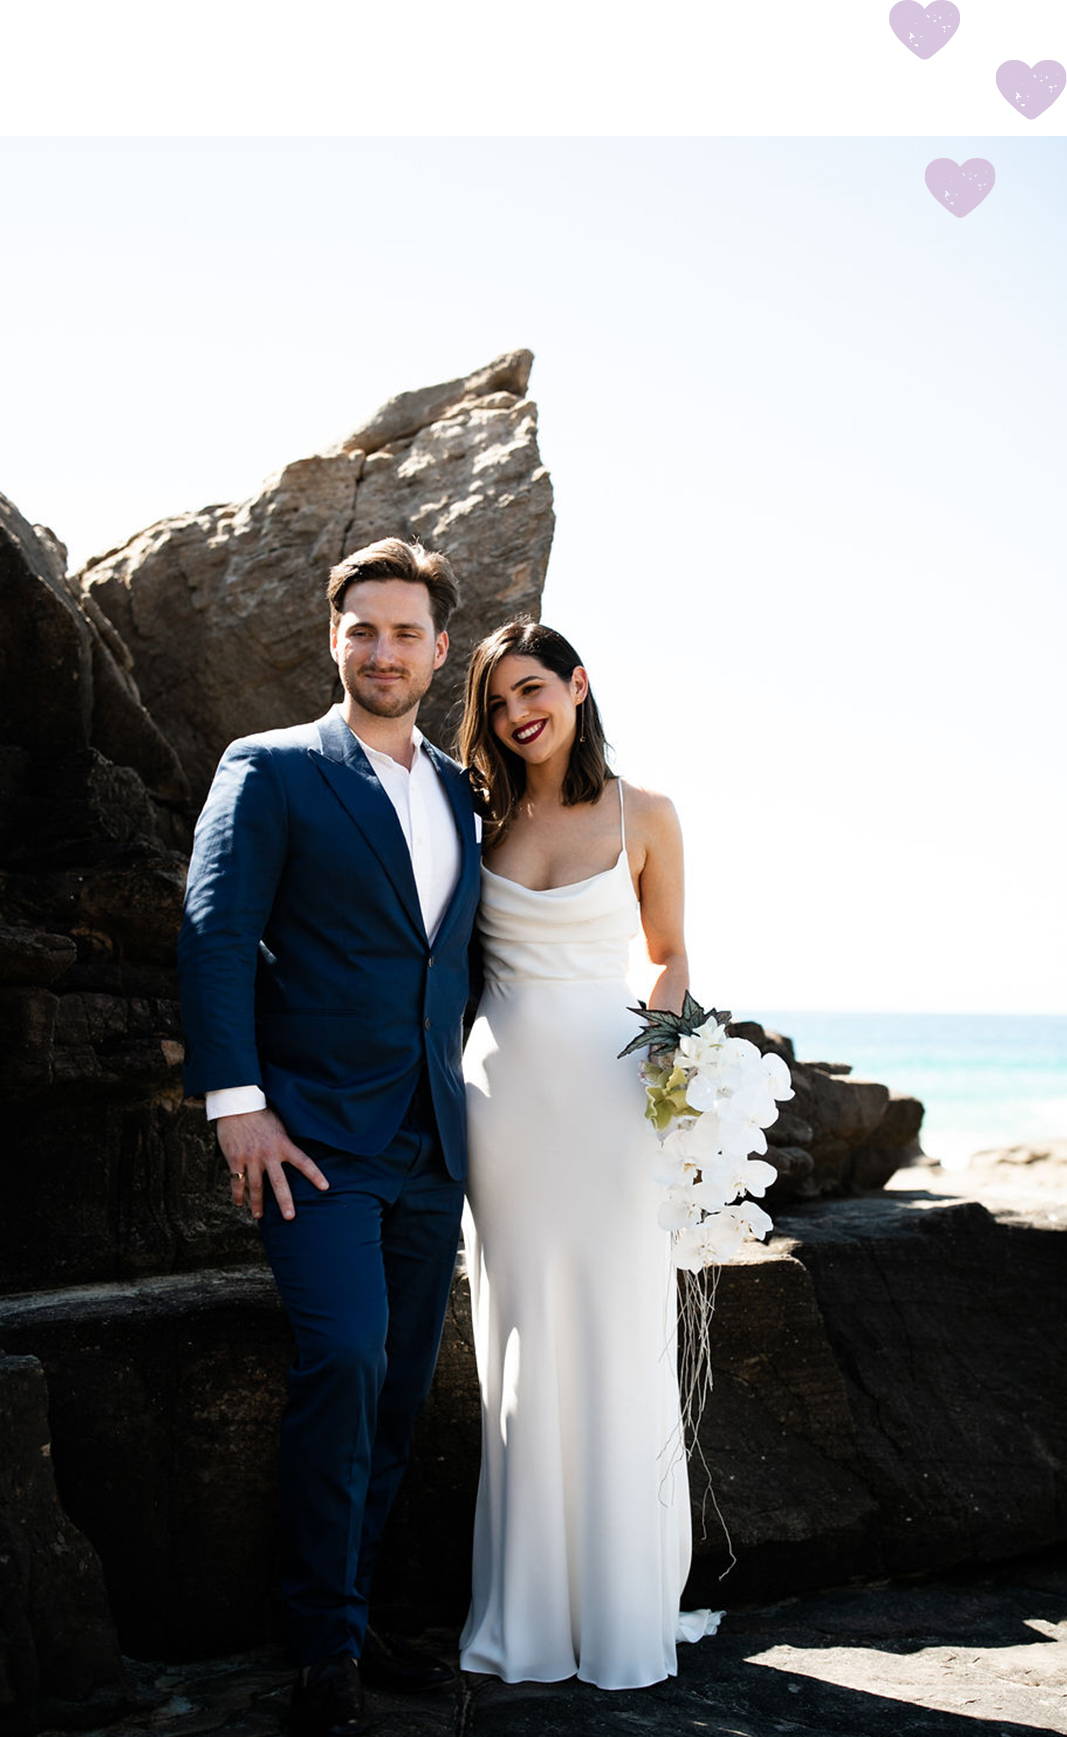 Bride wearing a white silk cowl neck dress and groom wearing navy suit